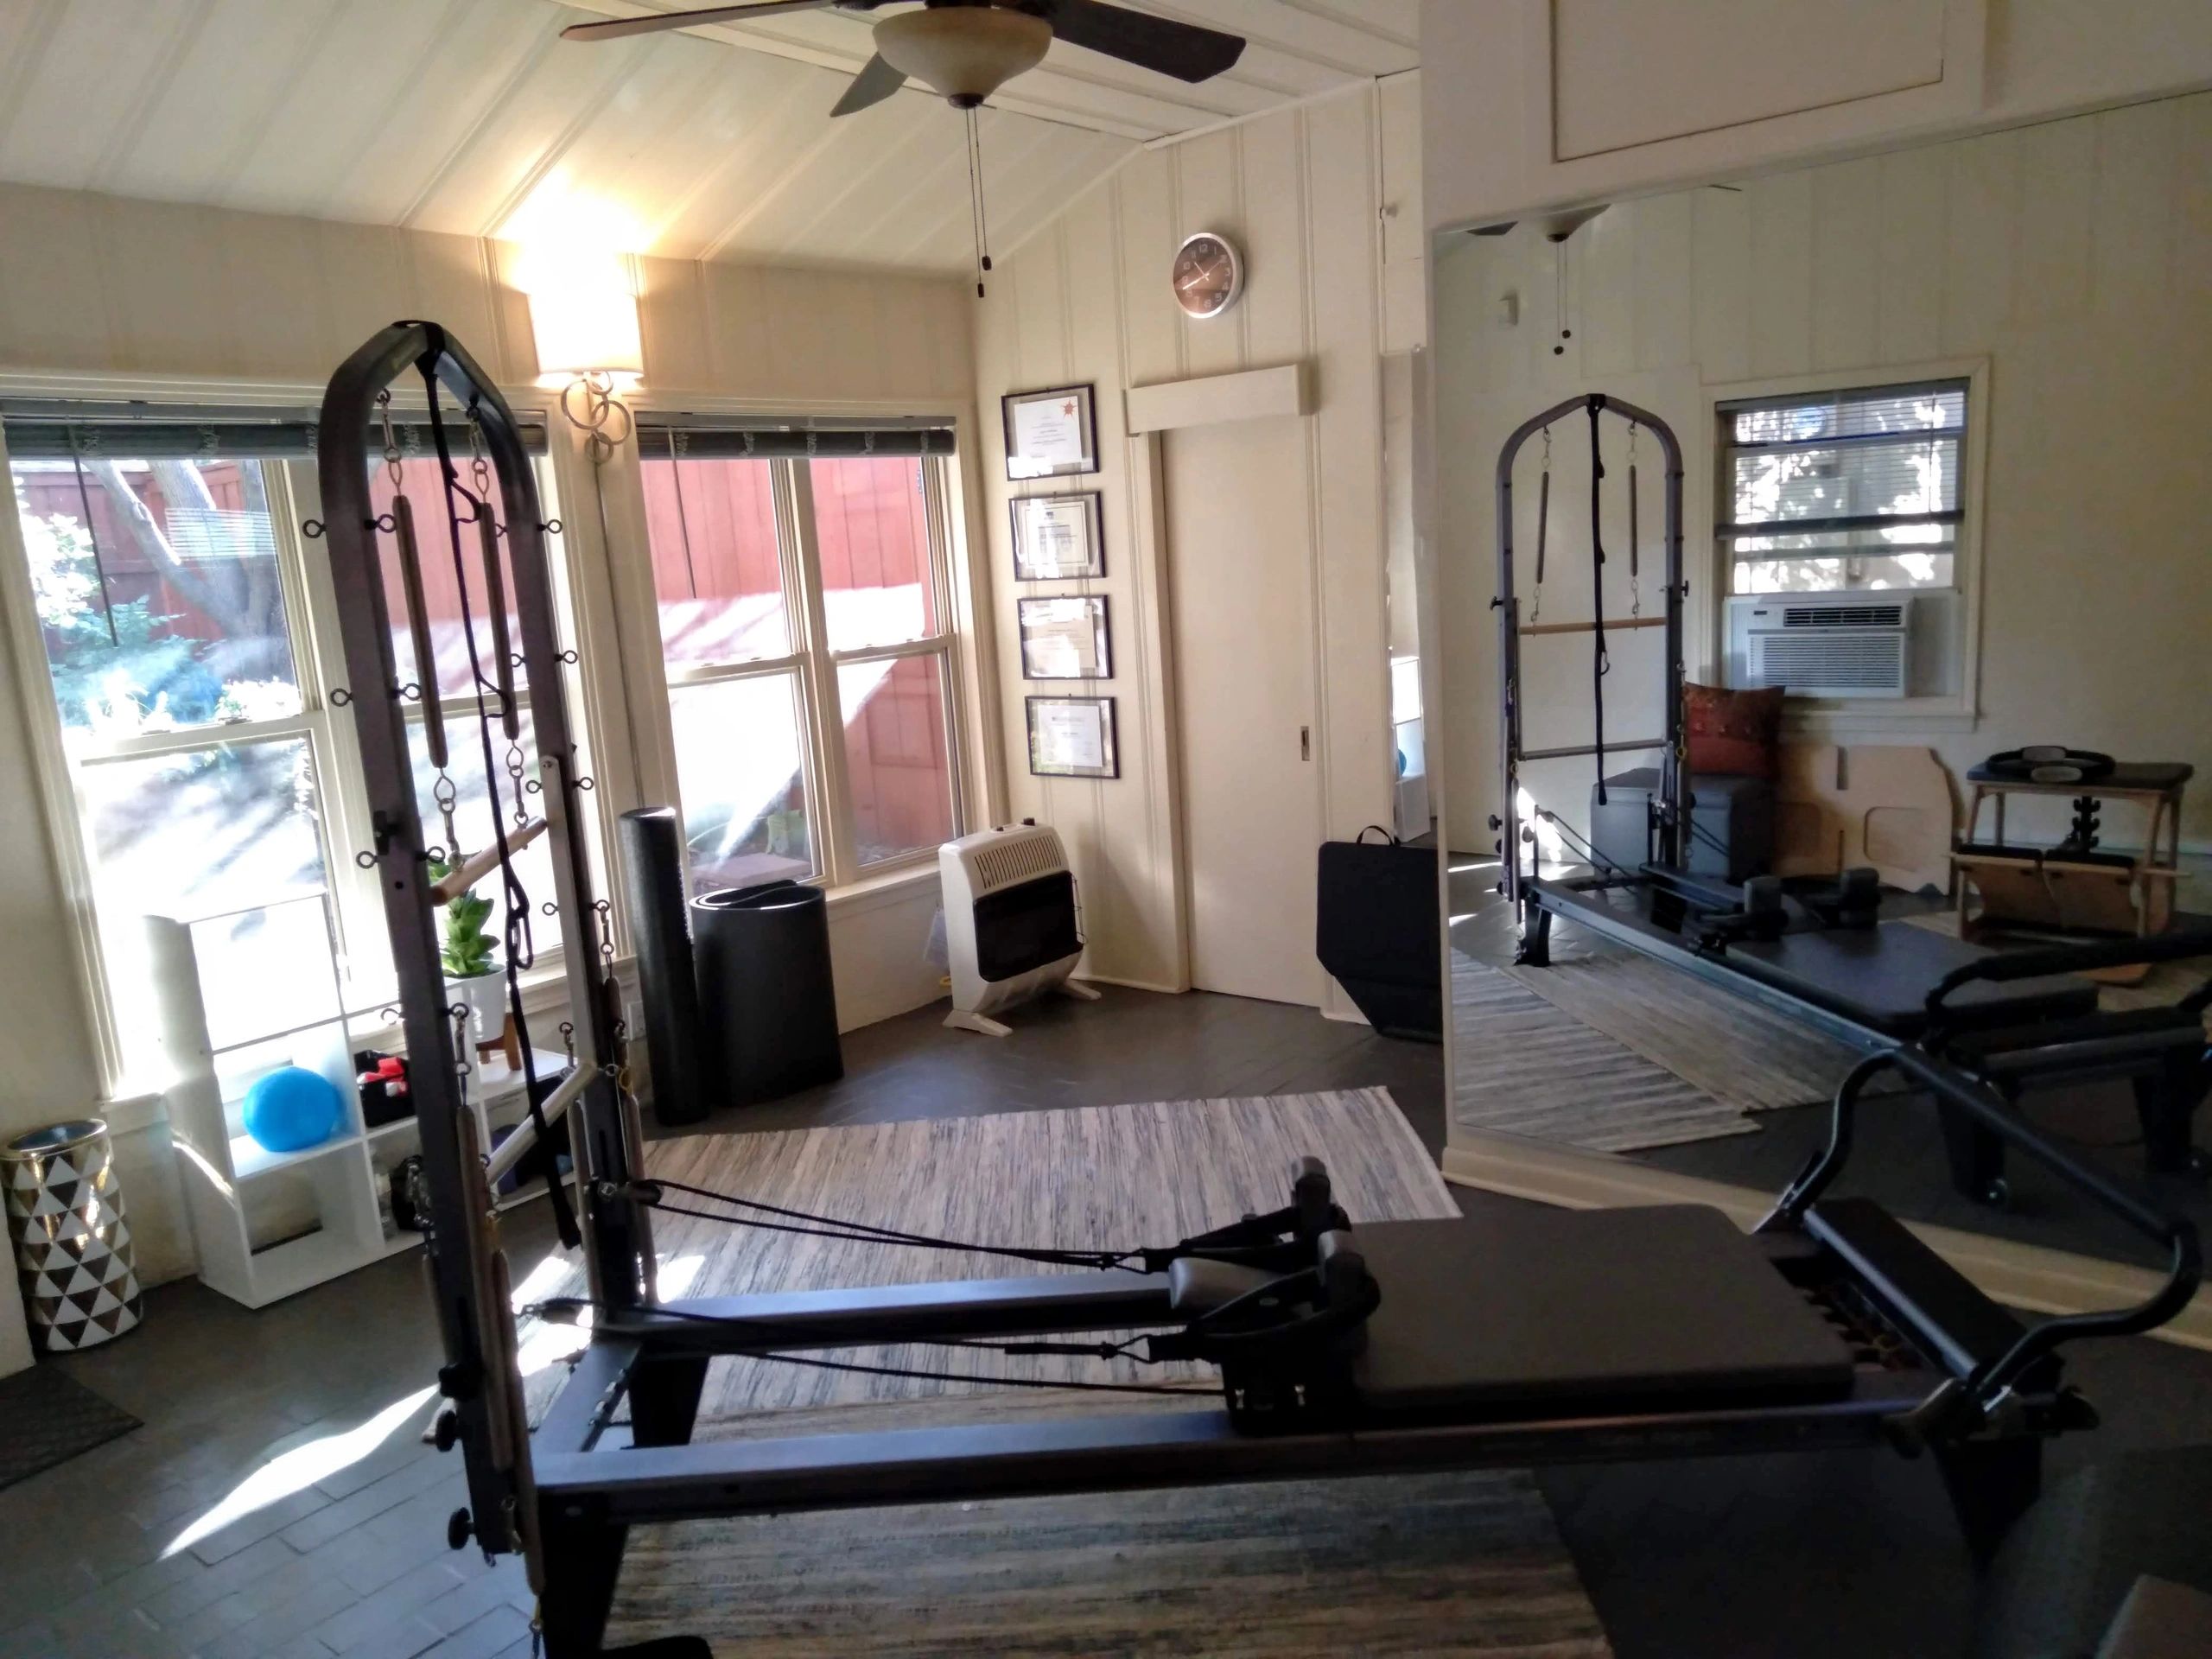 Pilates reformer with Tower, Bodies In Motion Pilates Studio, Dallas, TX. 